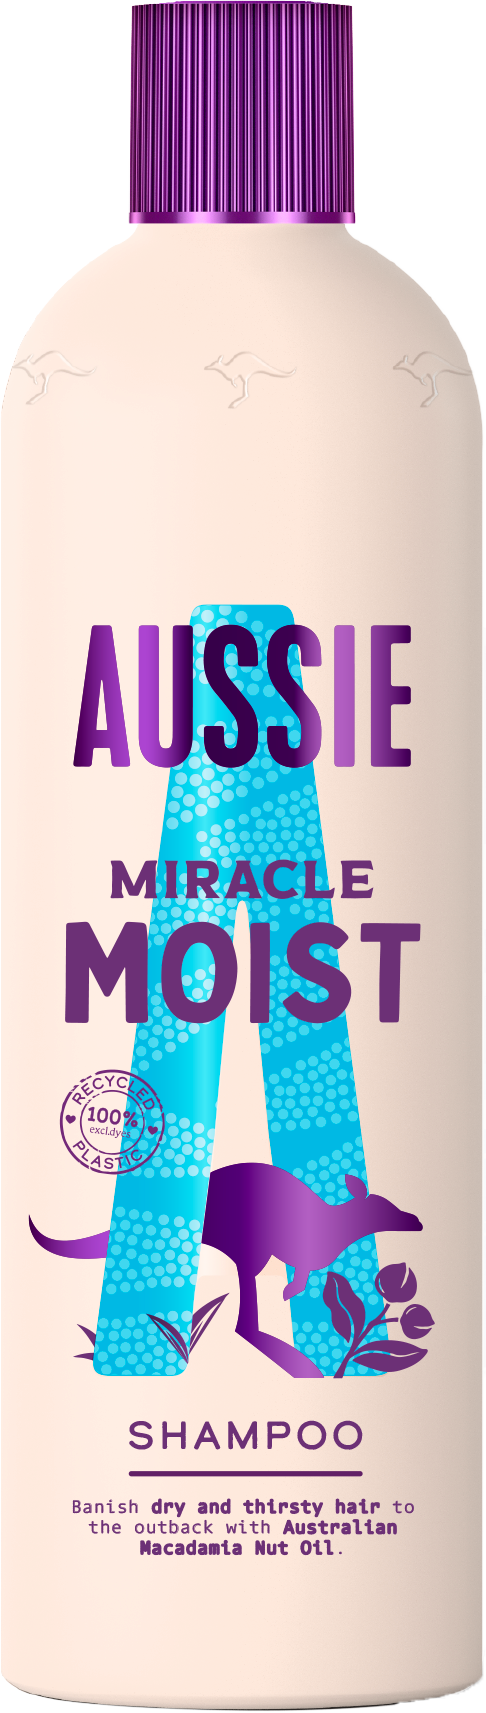 A picture of Miracle Moist shampoo Bottle